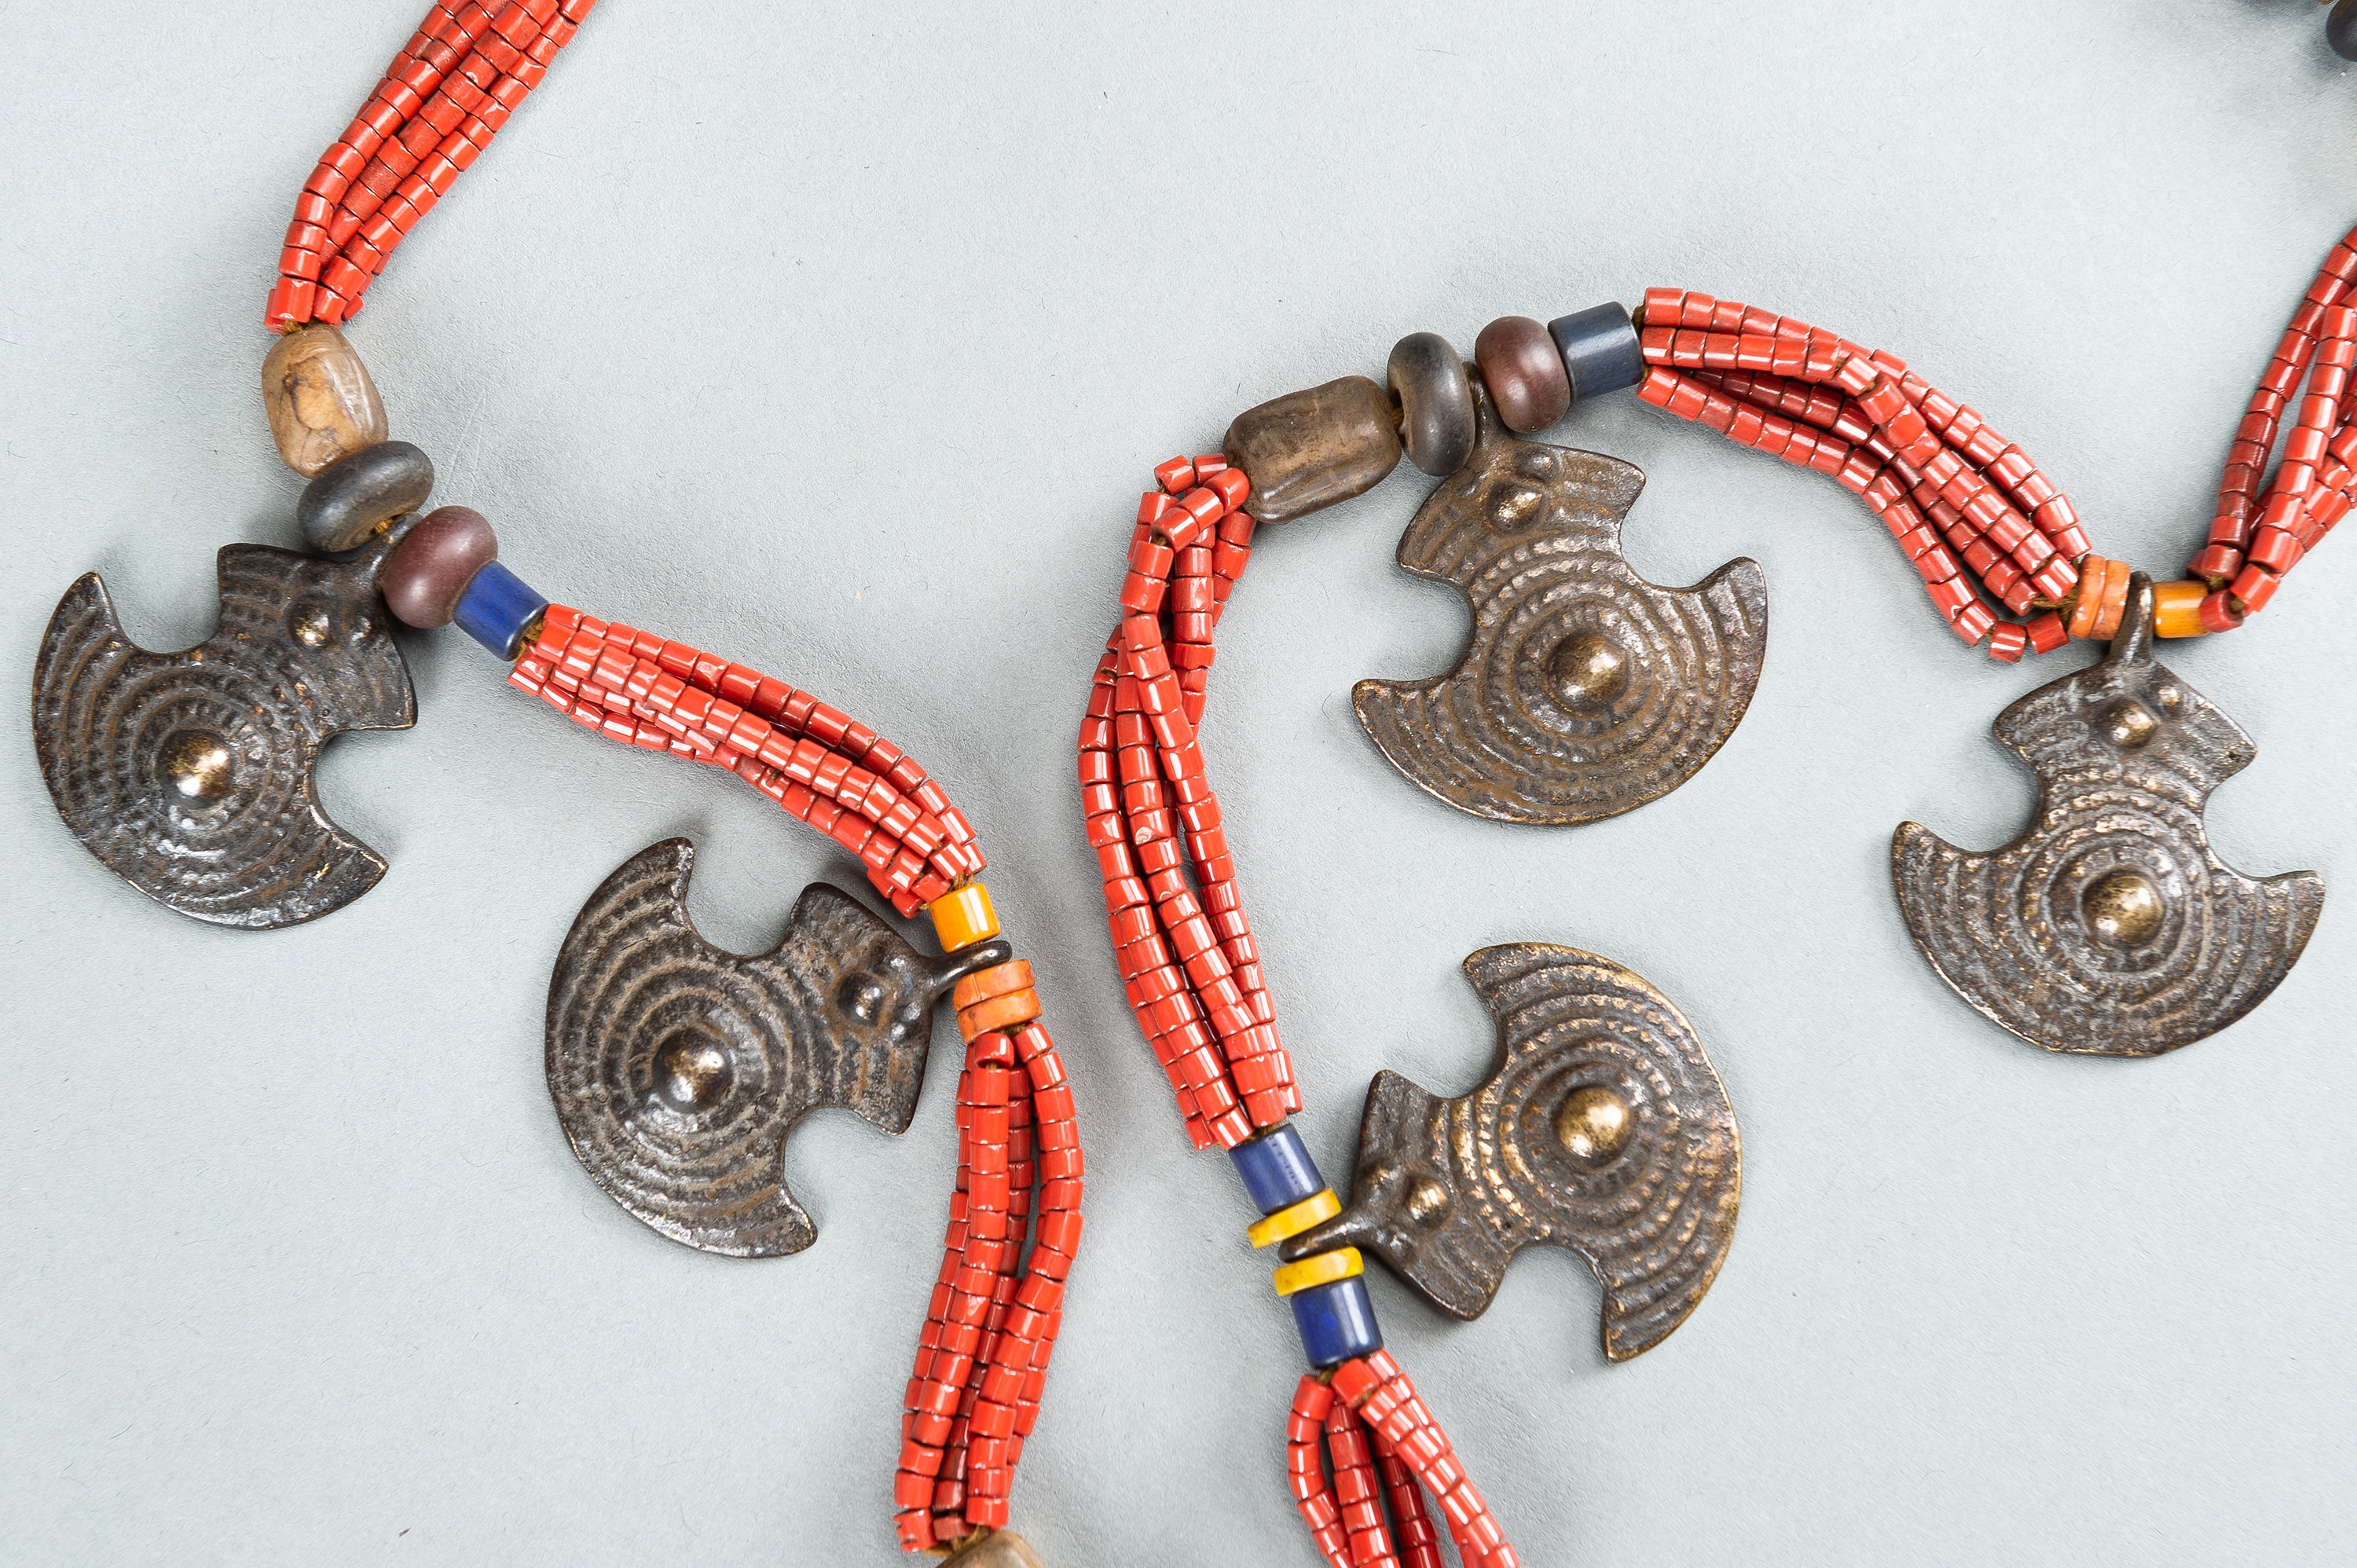 A NAGALAND MULTI-COLORED GLASS AND BRASS NECKLACE, c. 1900s - Image 8 of 11